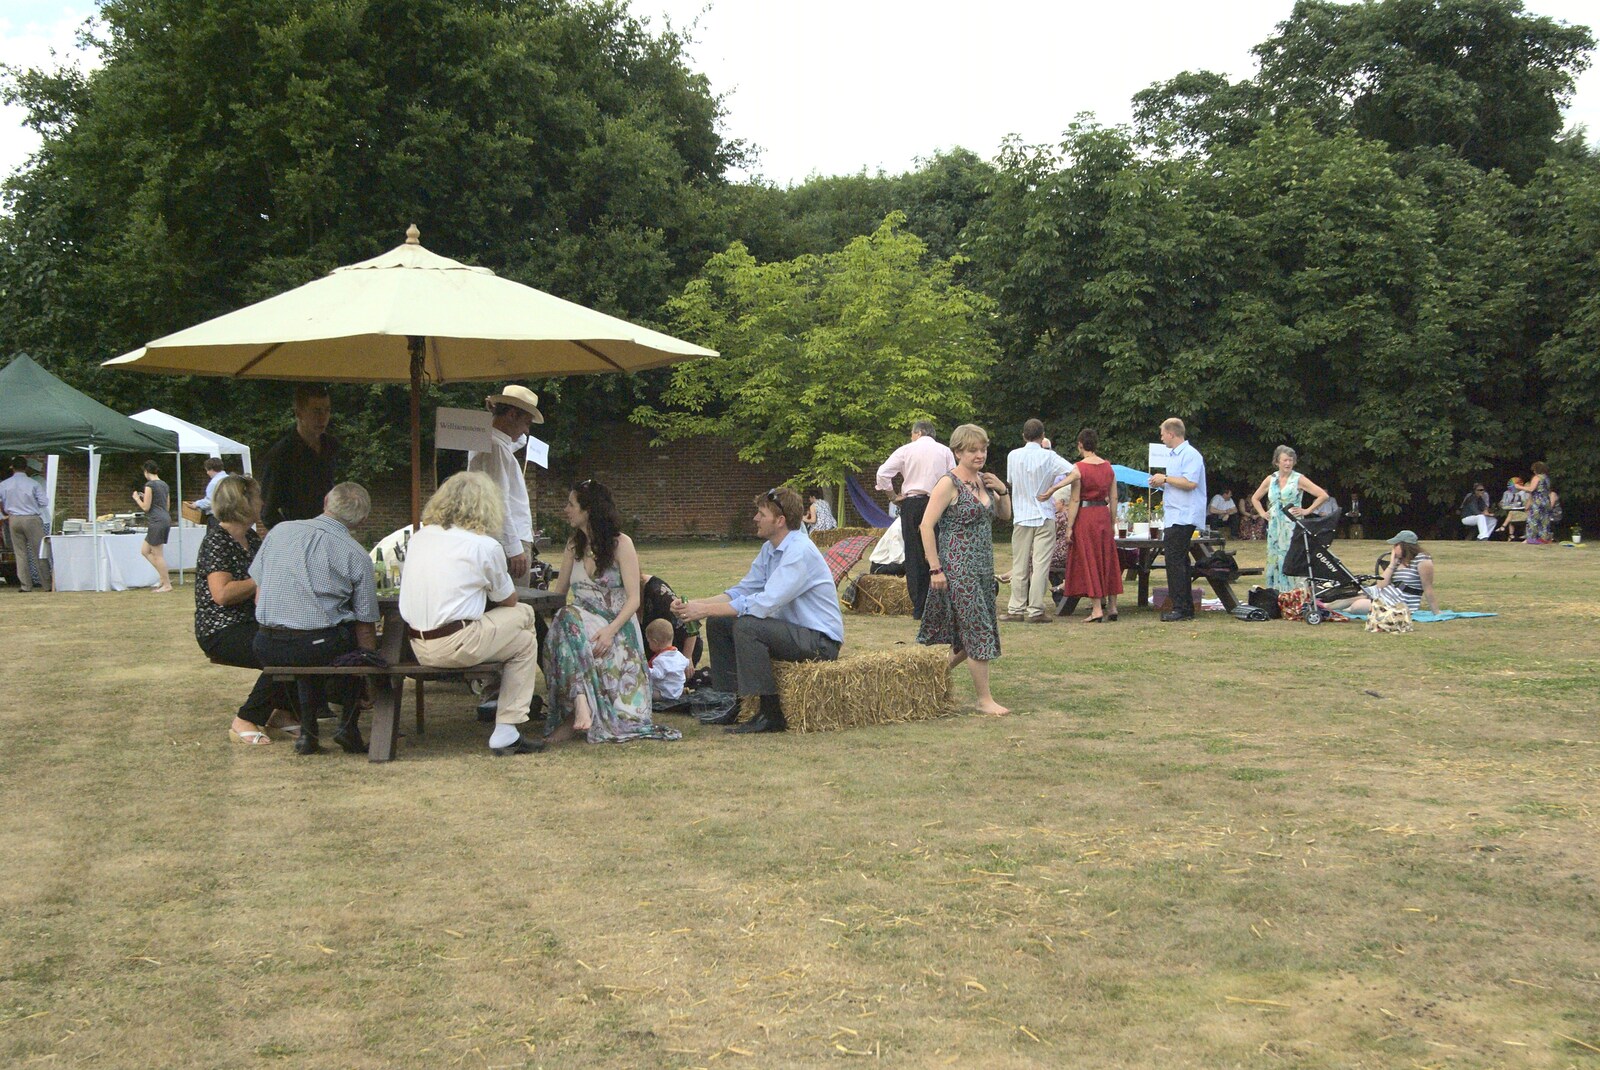 The wedding picnic from Nosher and Isobel's Wedding, Brome, Suffolk - 3rd July 2010